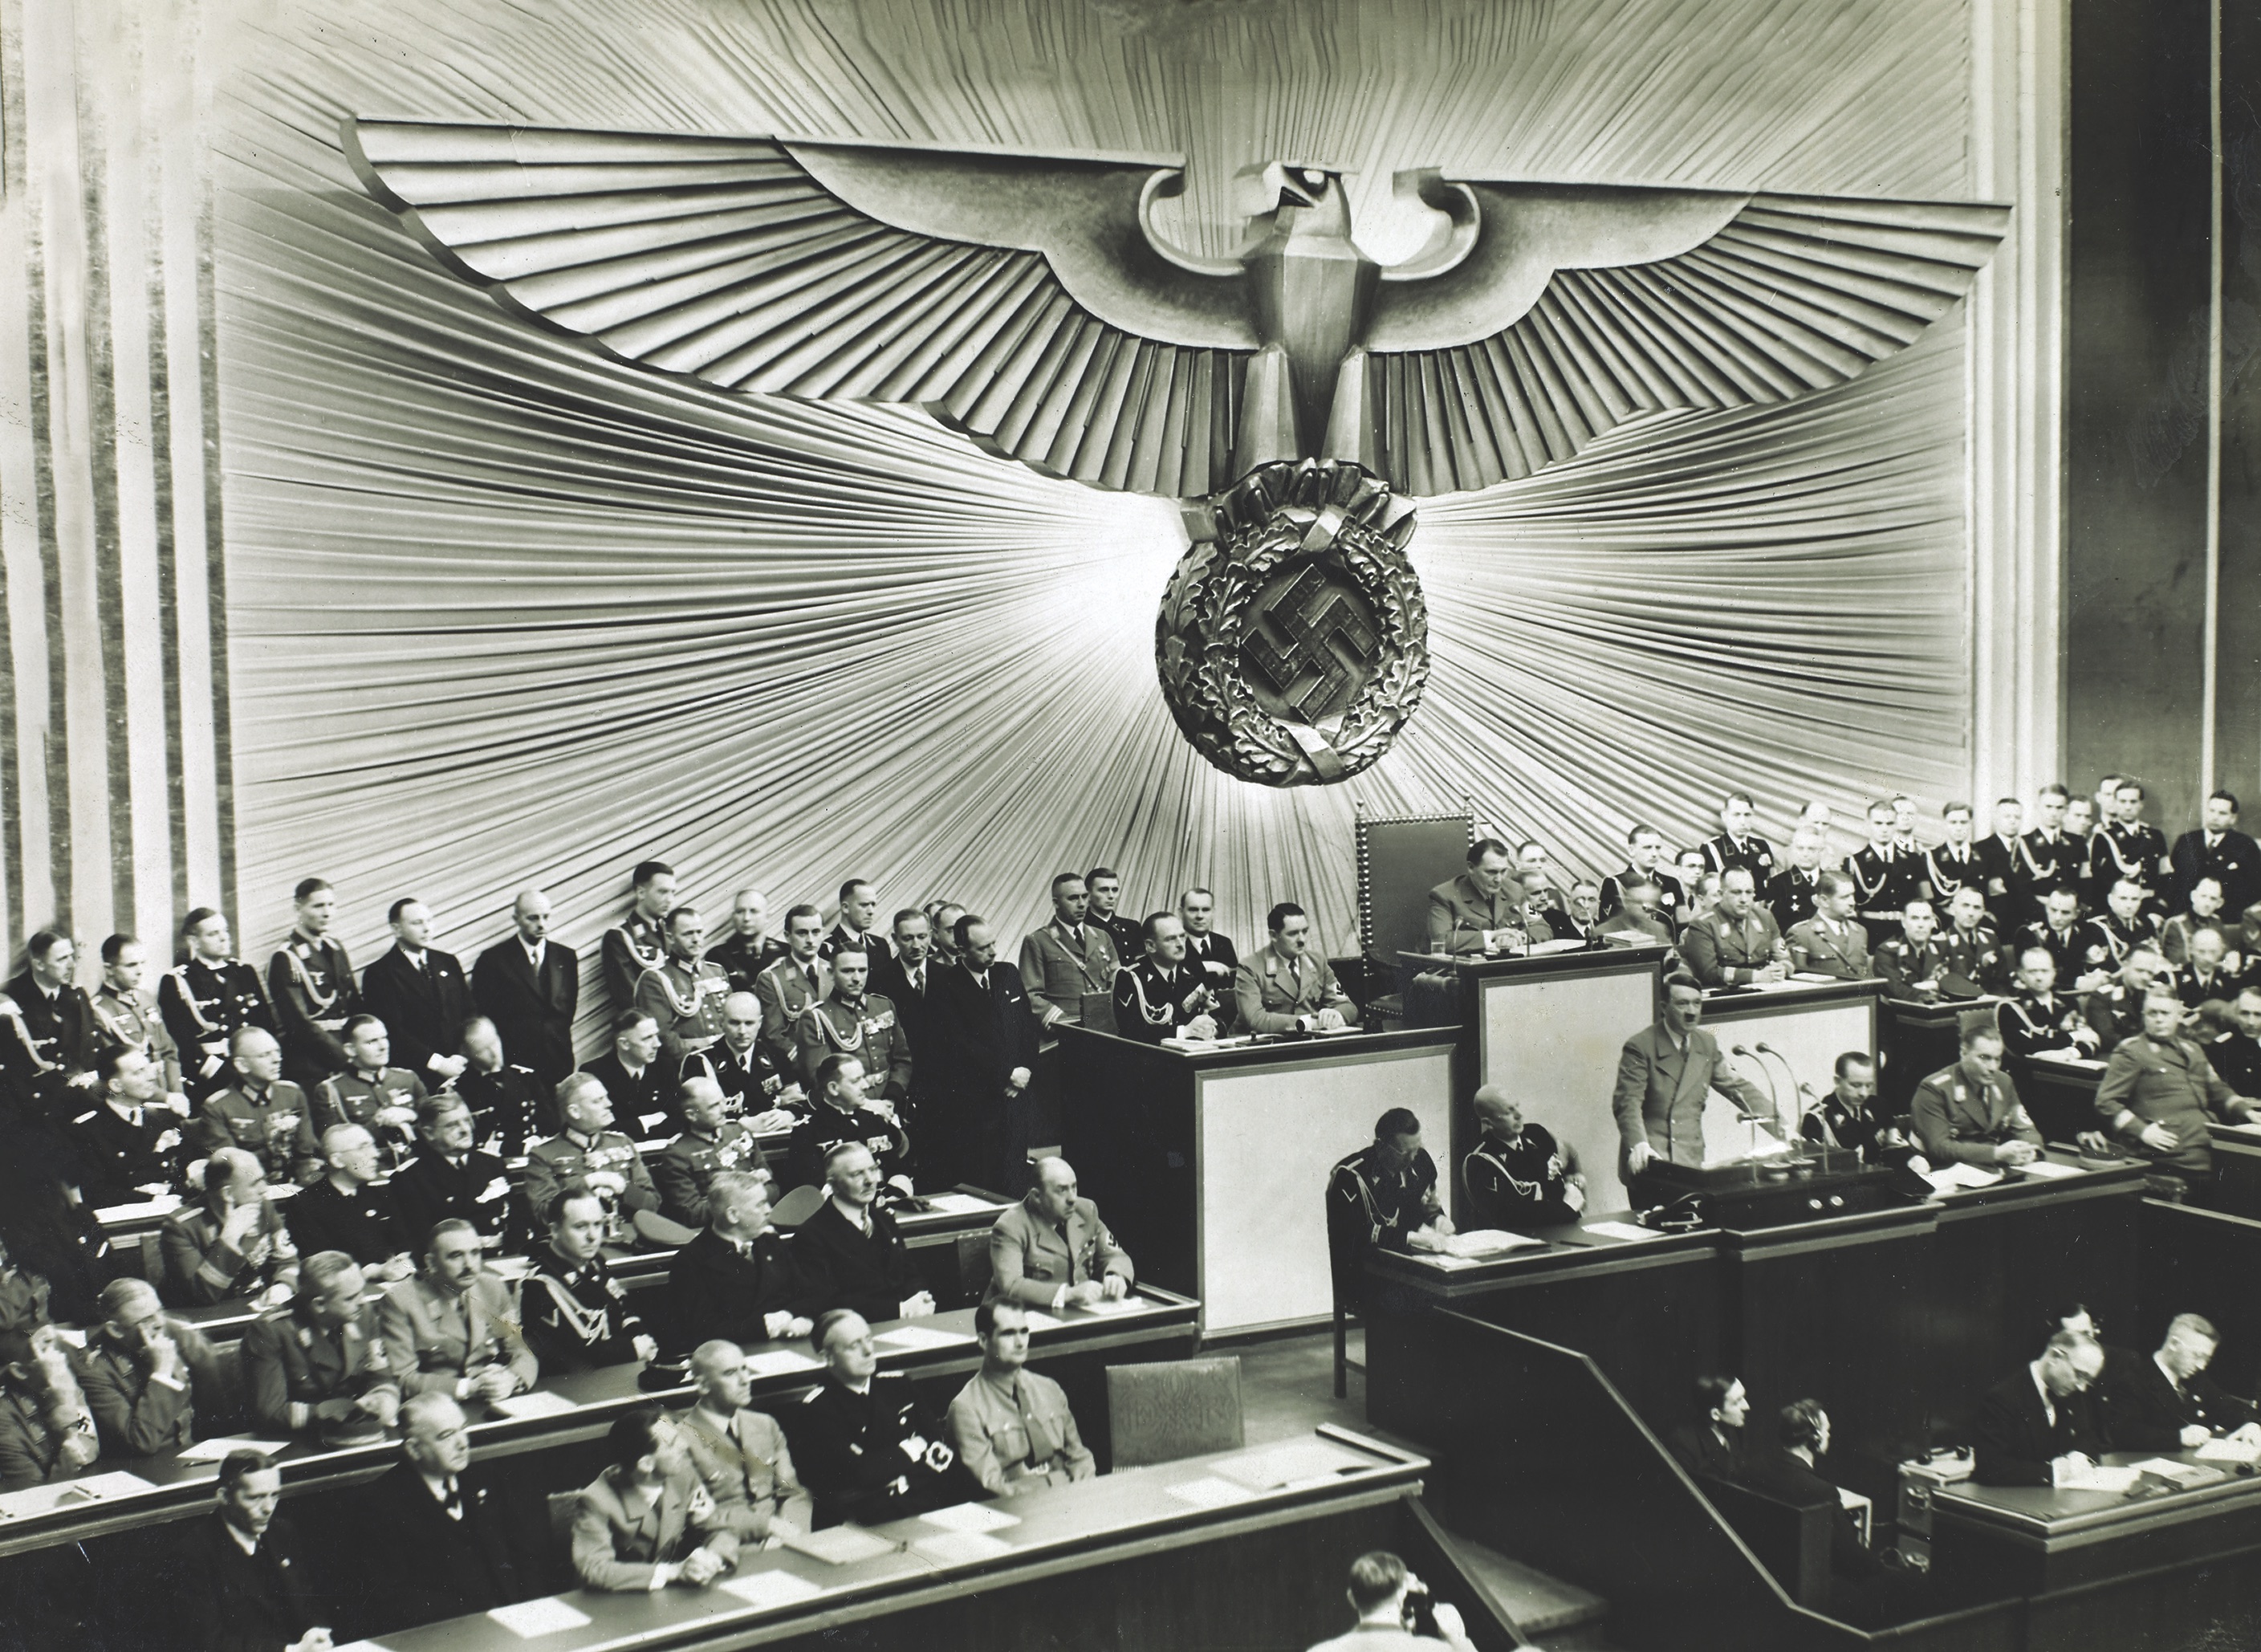 In this speech to the Reichstag on January 30, 1939, German chancellor Adolf Hitler, casting himself as a prophet, warned that another world war would result in“the annihilation of the Jewish race in Europe.” (Arquivo Nacional Collection, Brazil)